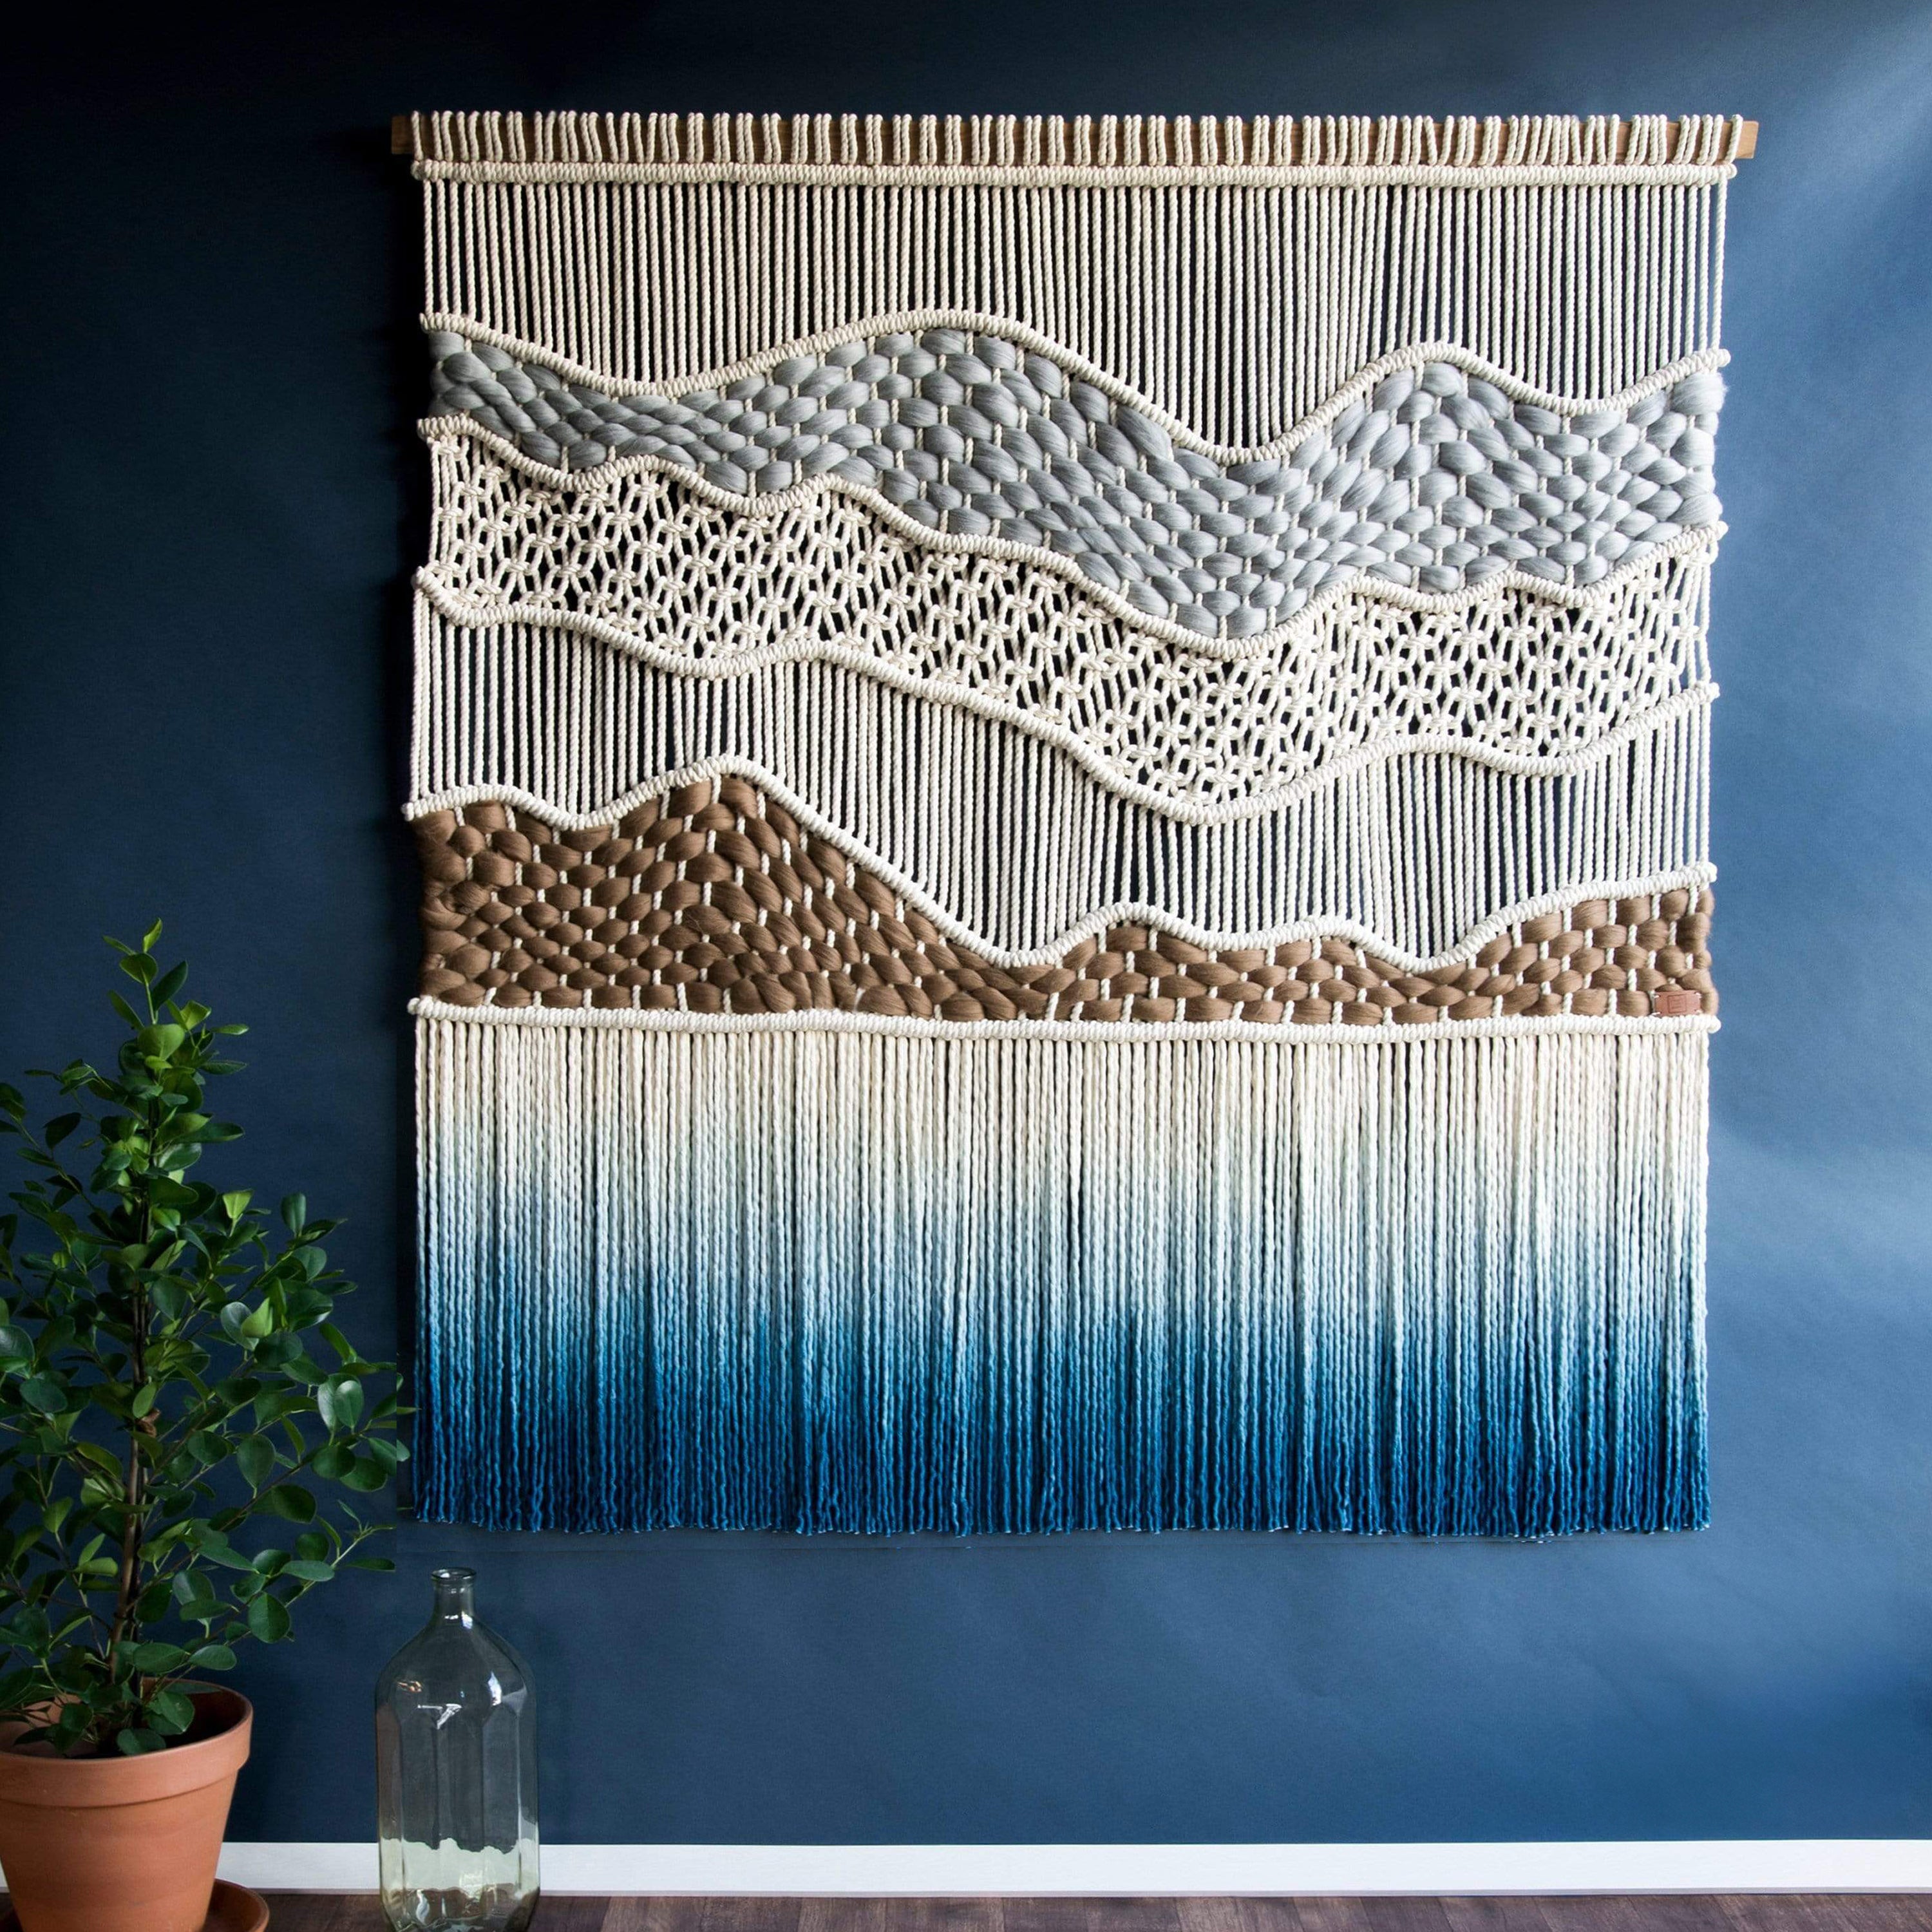 Large Macrame Wall Tapestry - SOFT HILLS by Rianne Aarts